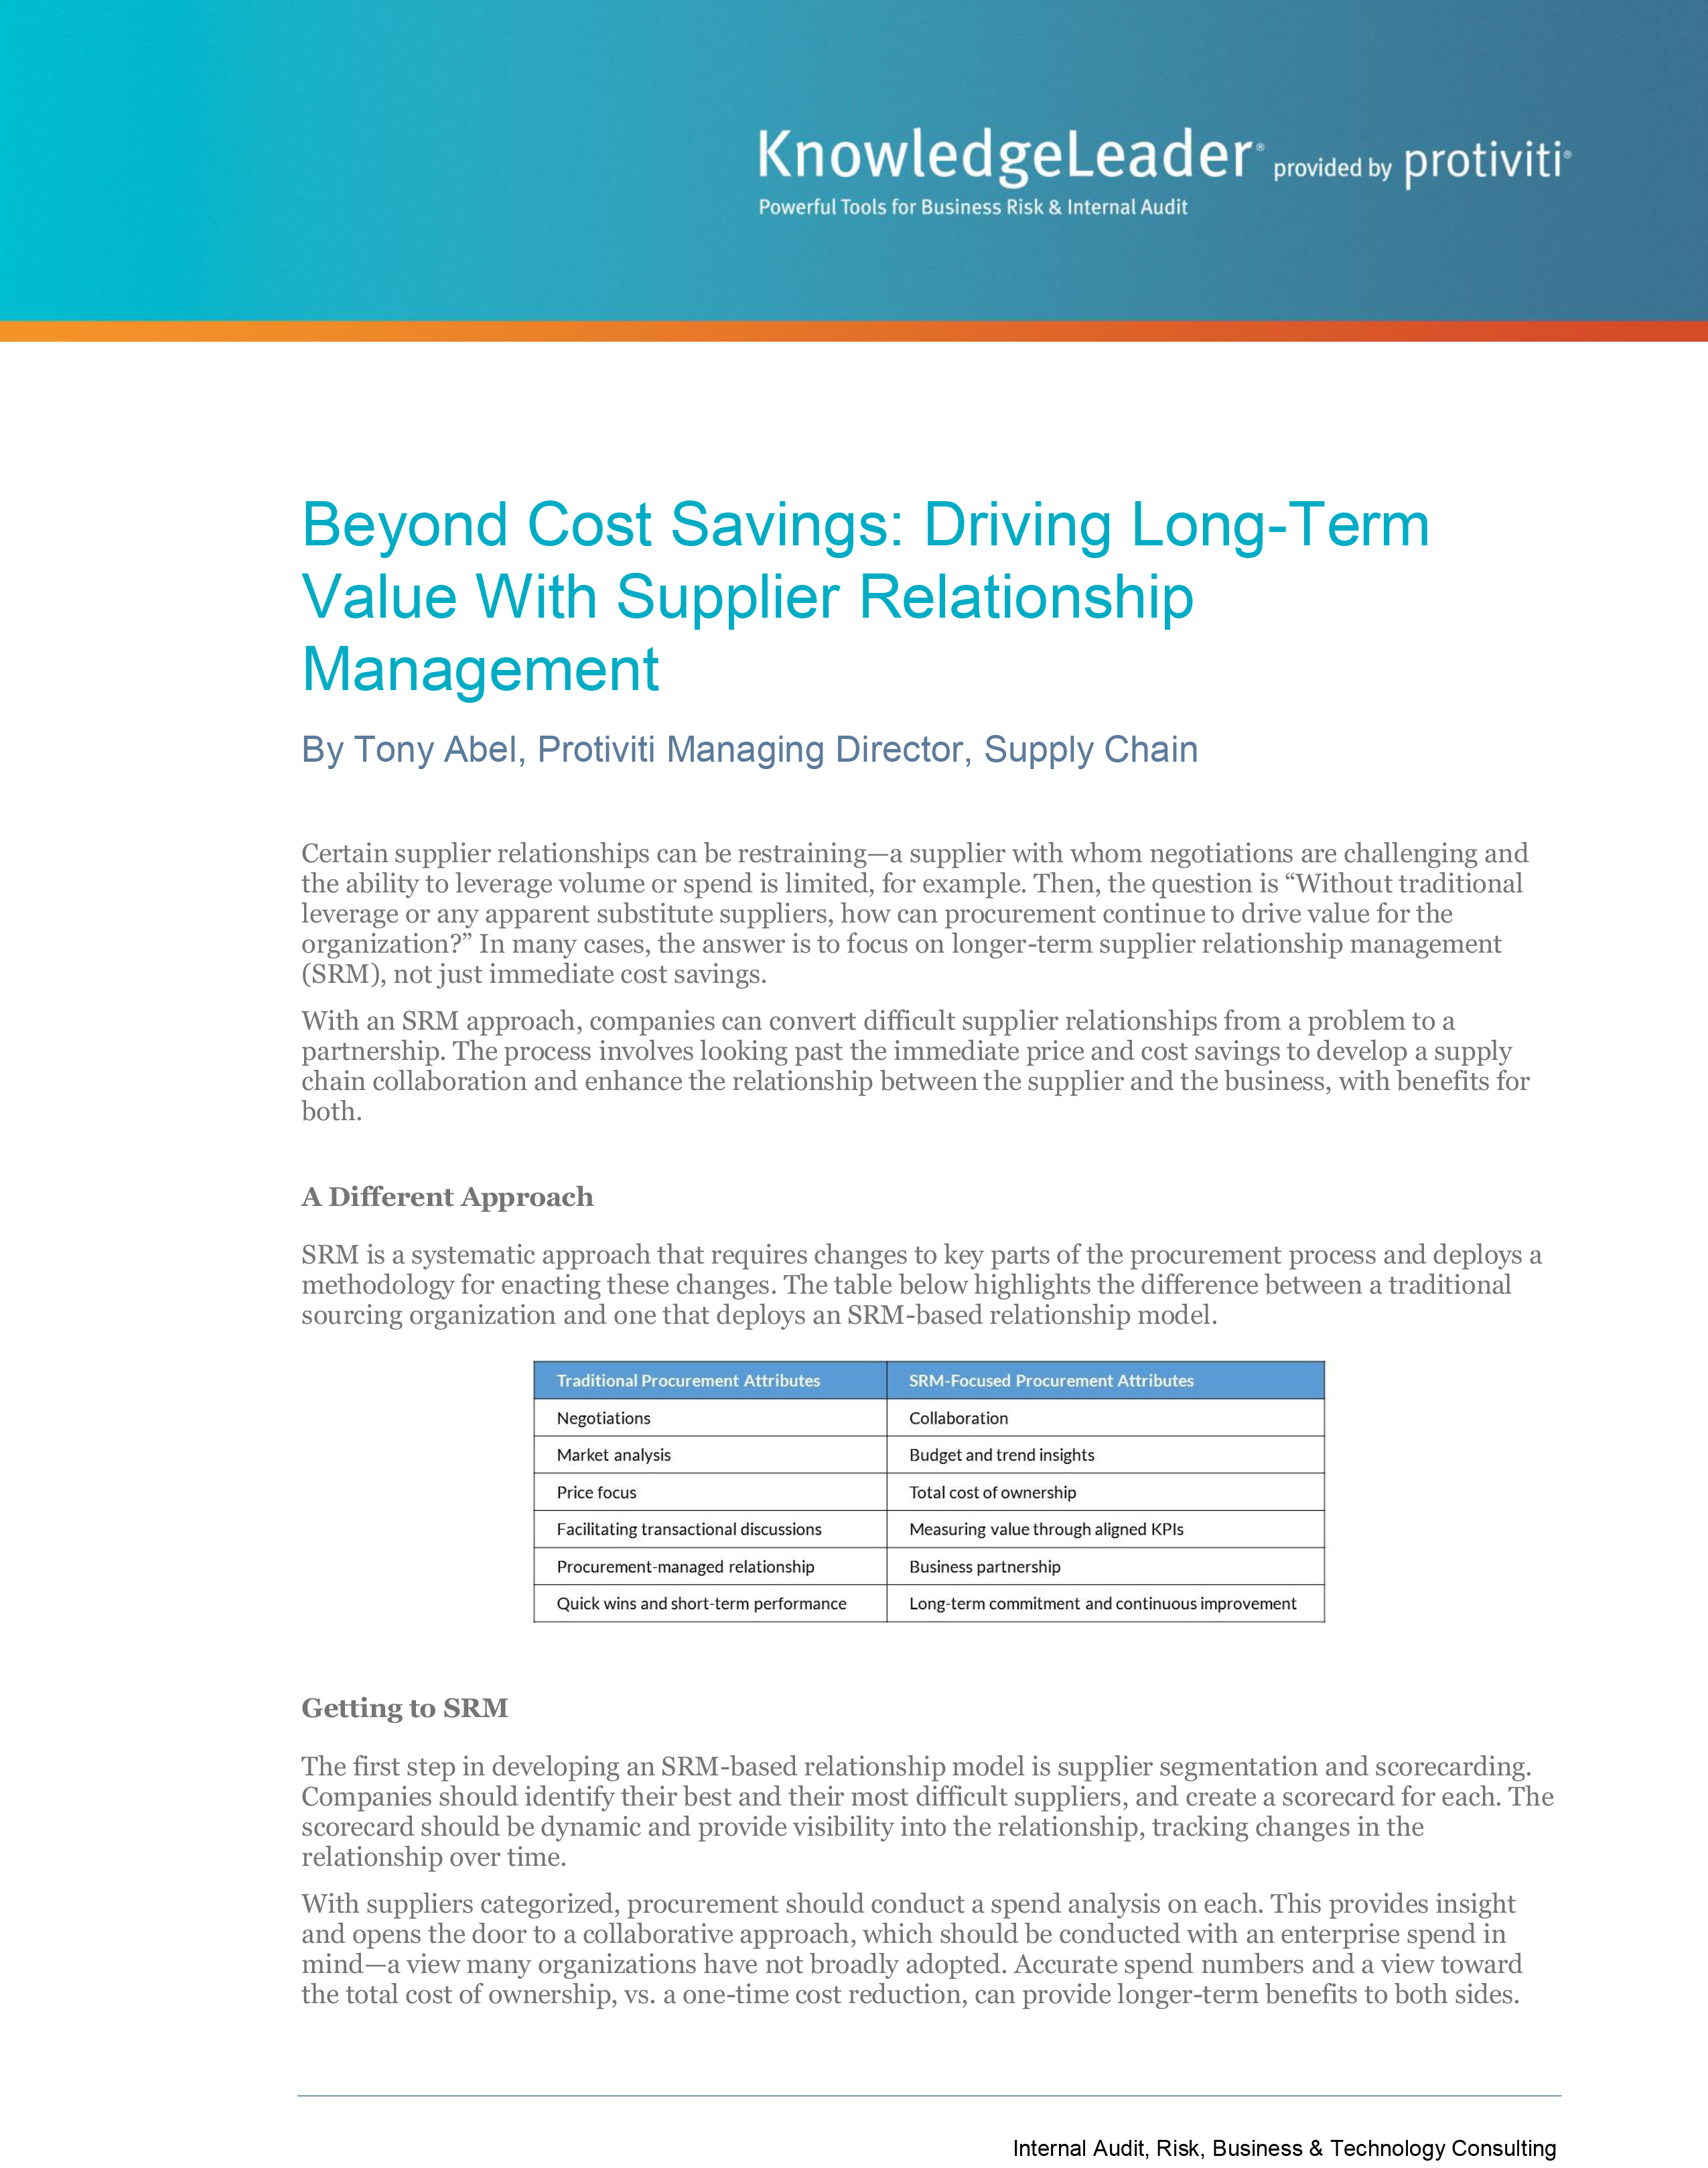 Screenshot of the first page of Beyond Cost Savings - Driving Long-Term Value With Supplier Relationship Management